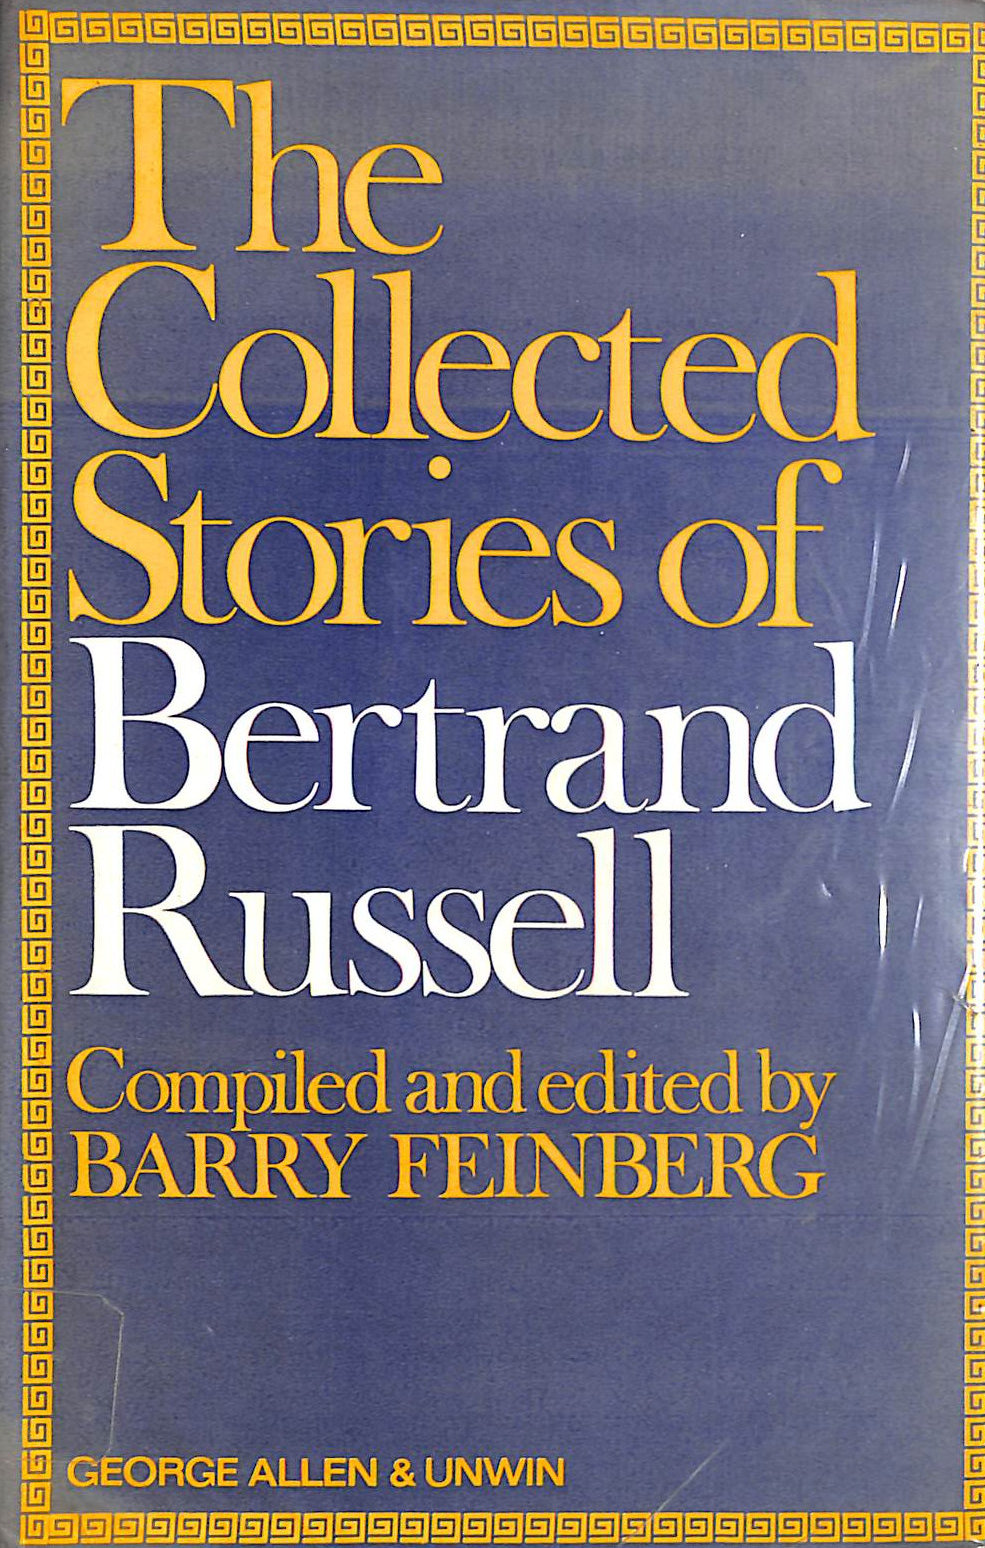 BARRY FEINBERG [EDITOR] - The Collected Stories of Bertrand Russell